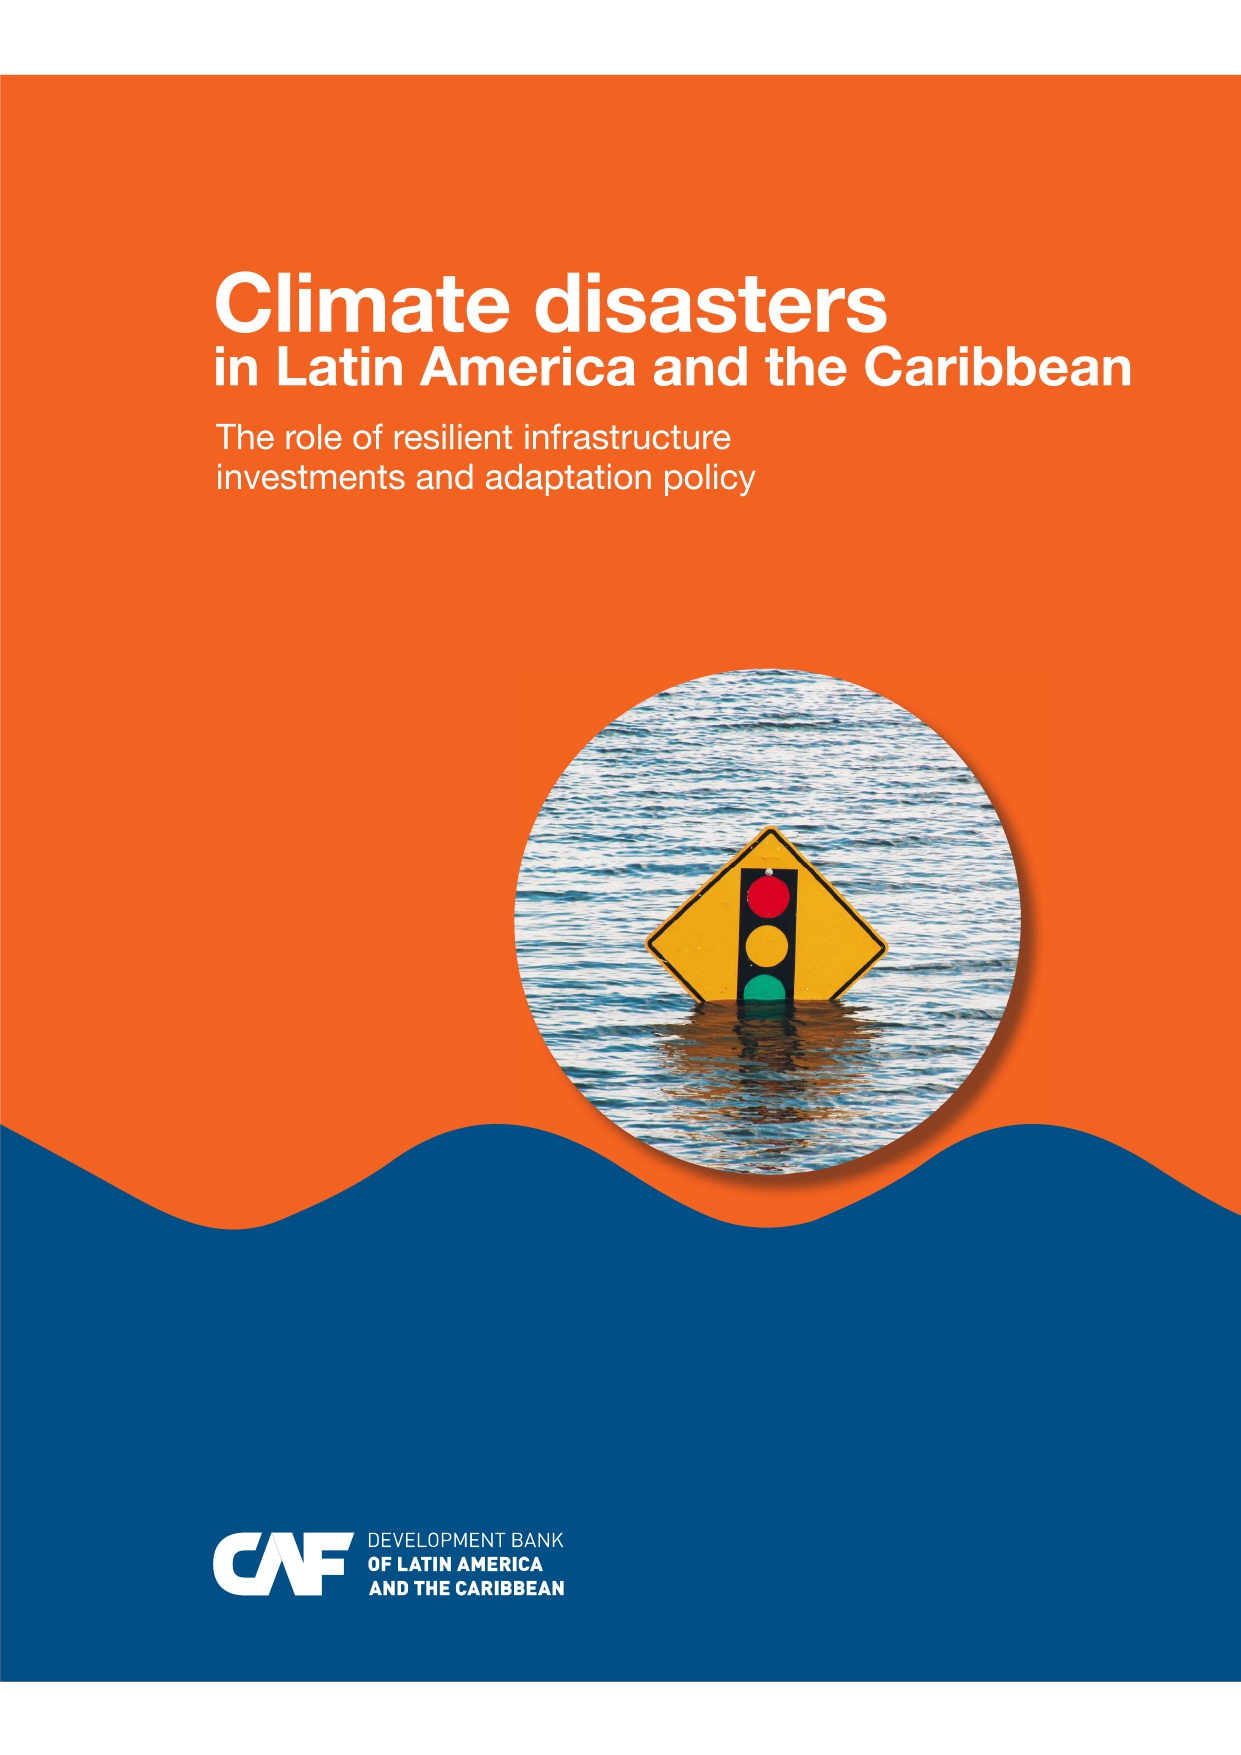 Climate disasters in Latin America and the Caribbean - the role of resilient infrastructure investments and adaptation policy